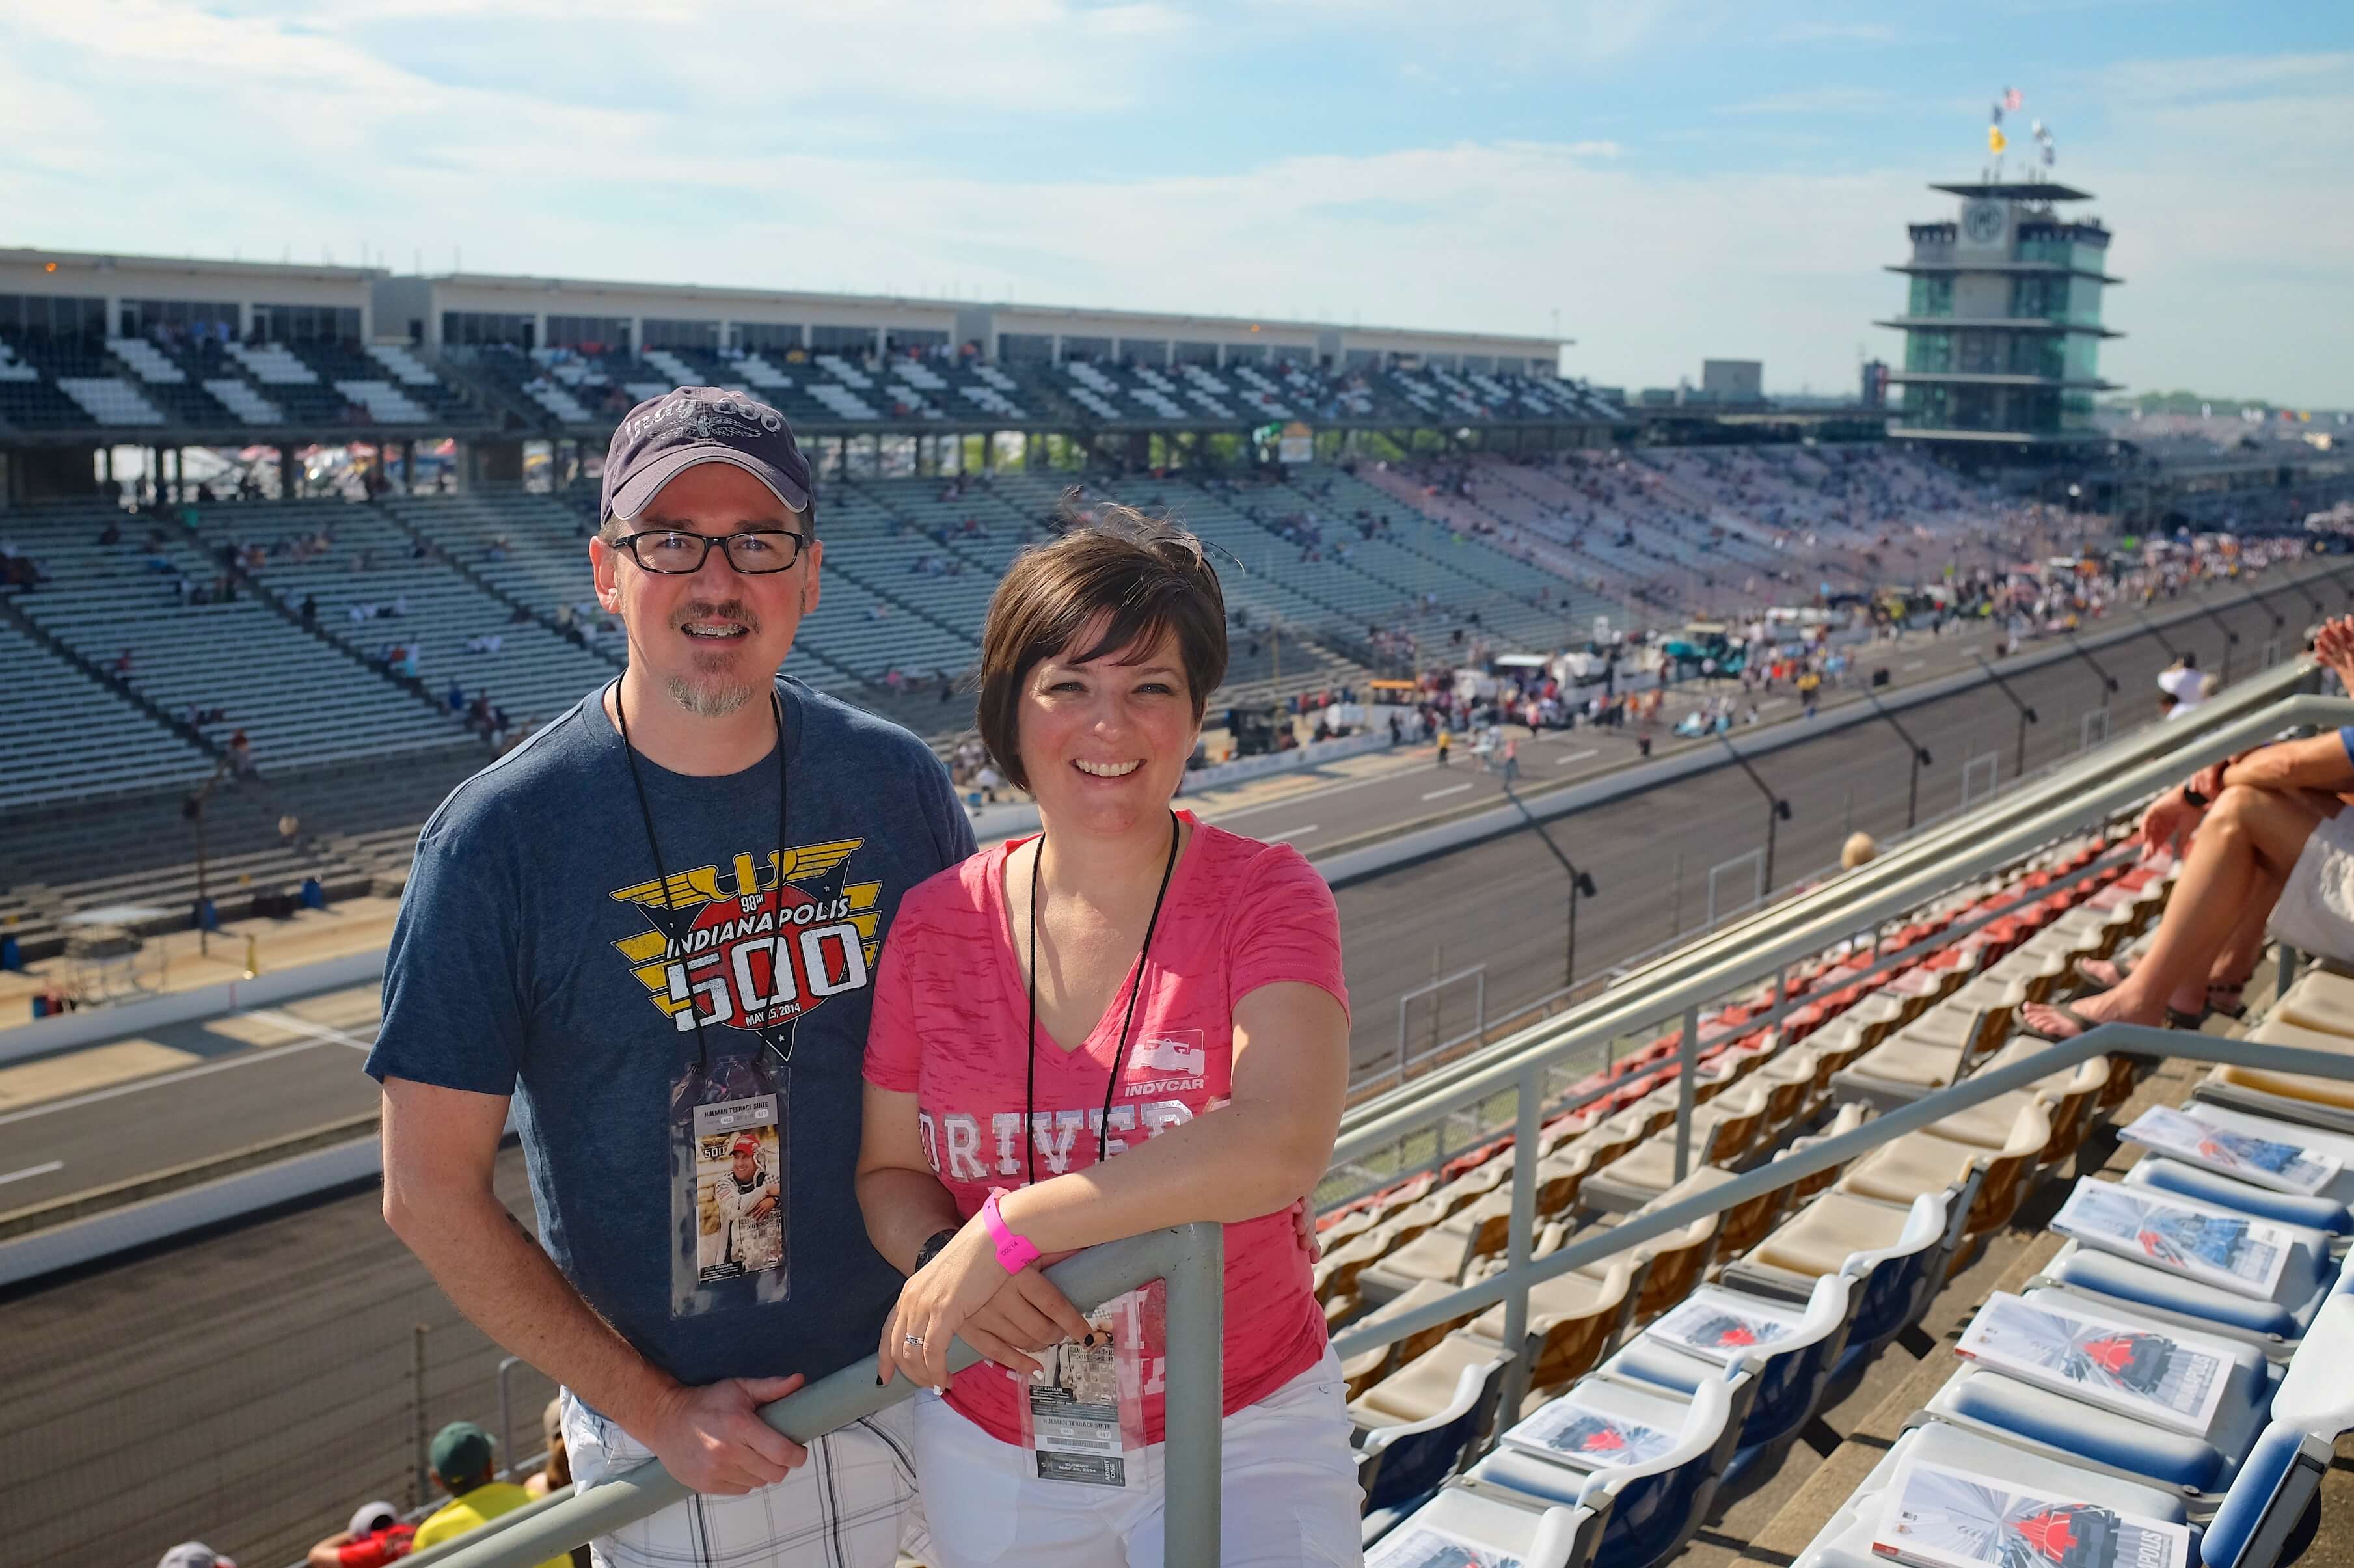 Kay and I at the Indy 500